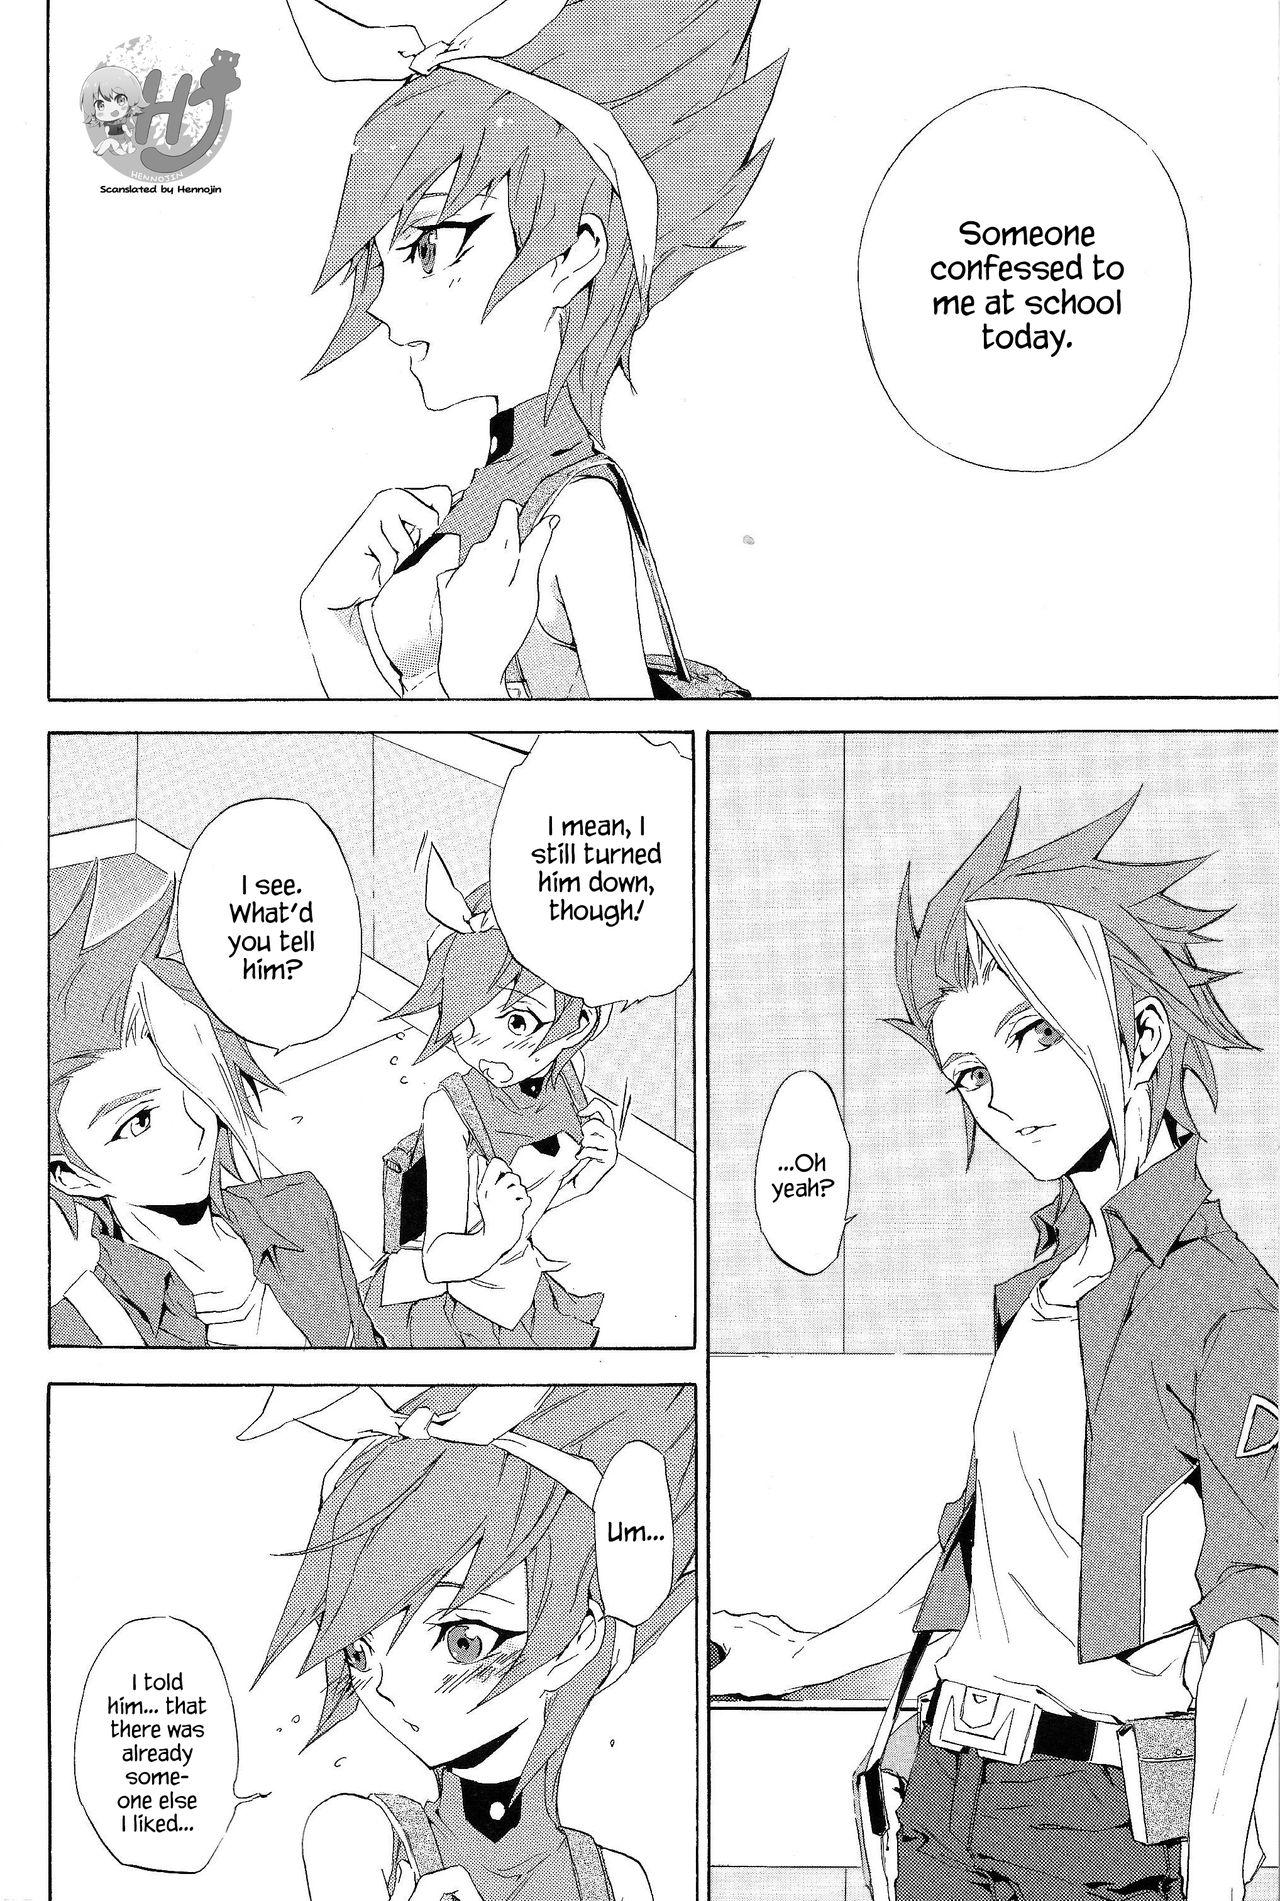 Parties White x bunny - Yu-gi-oh zexal Insertion - Page 3